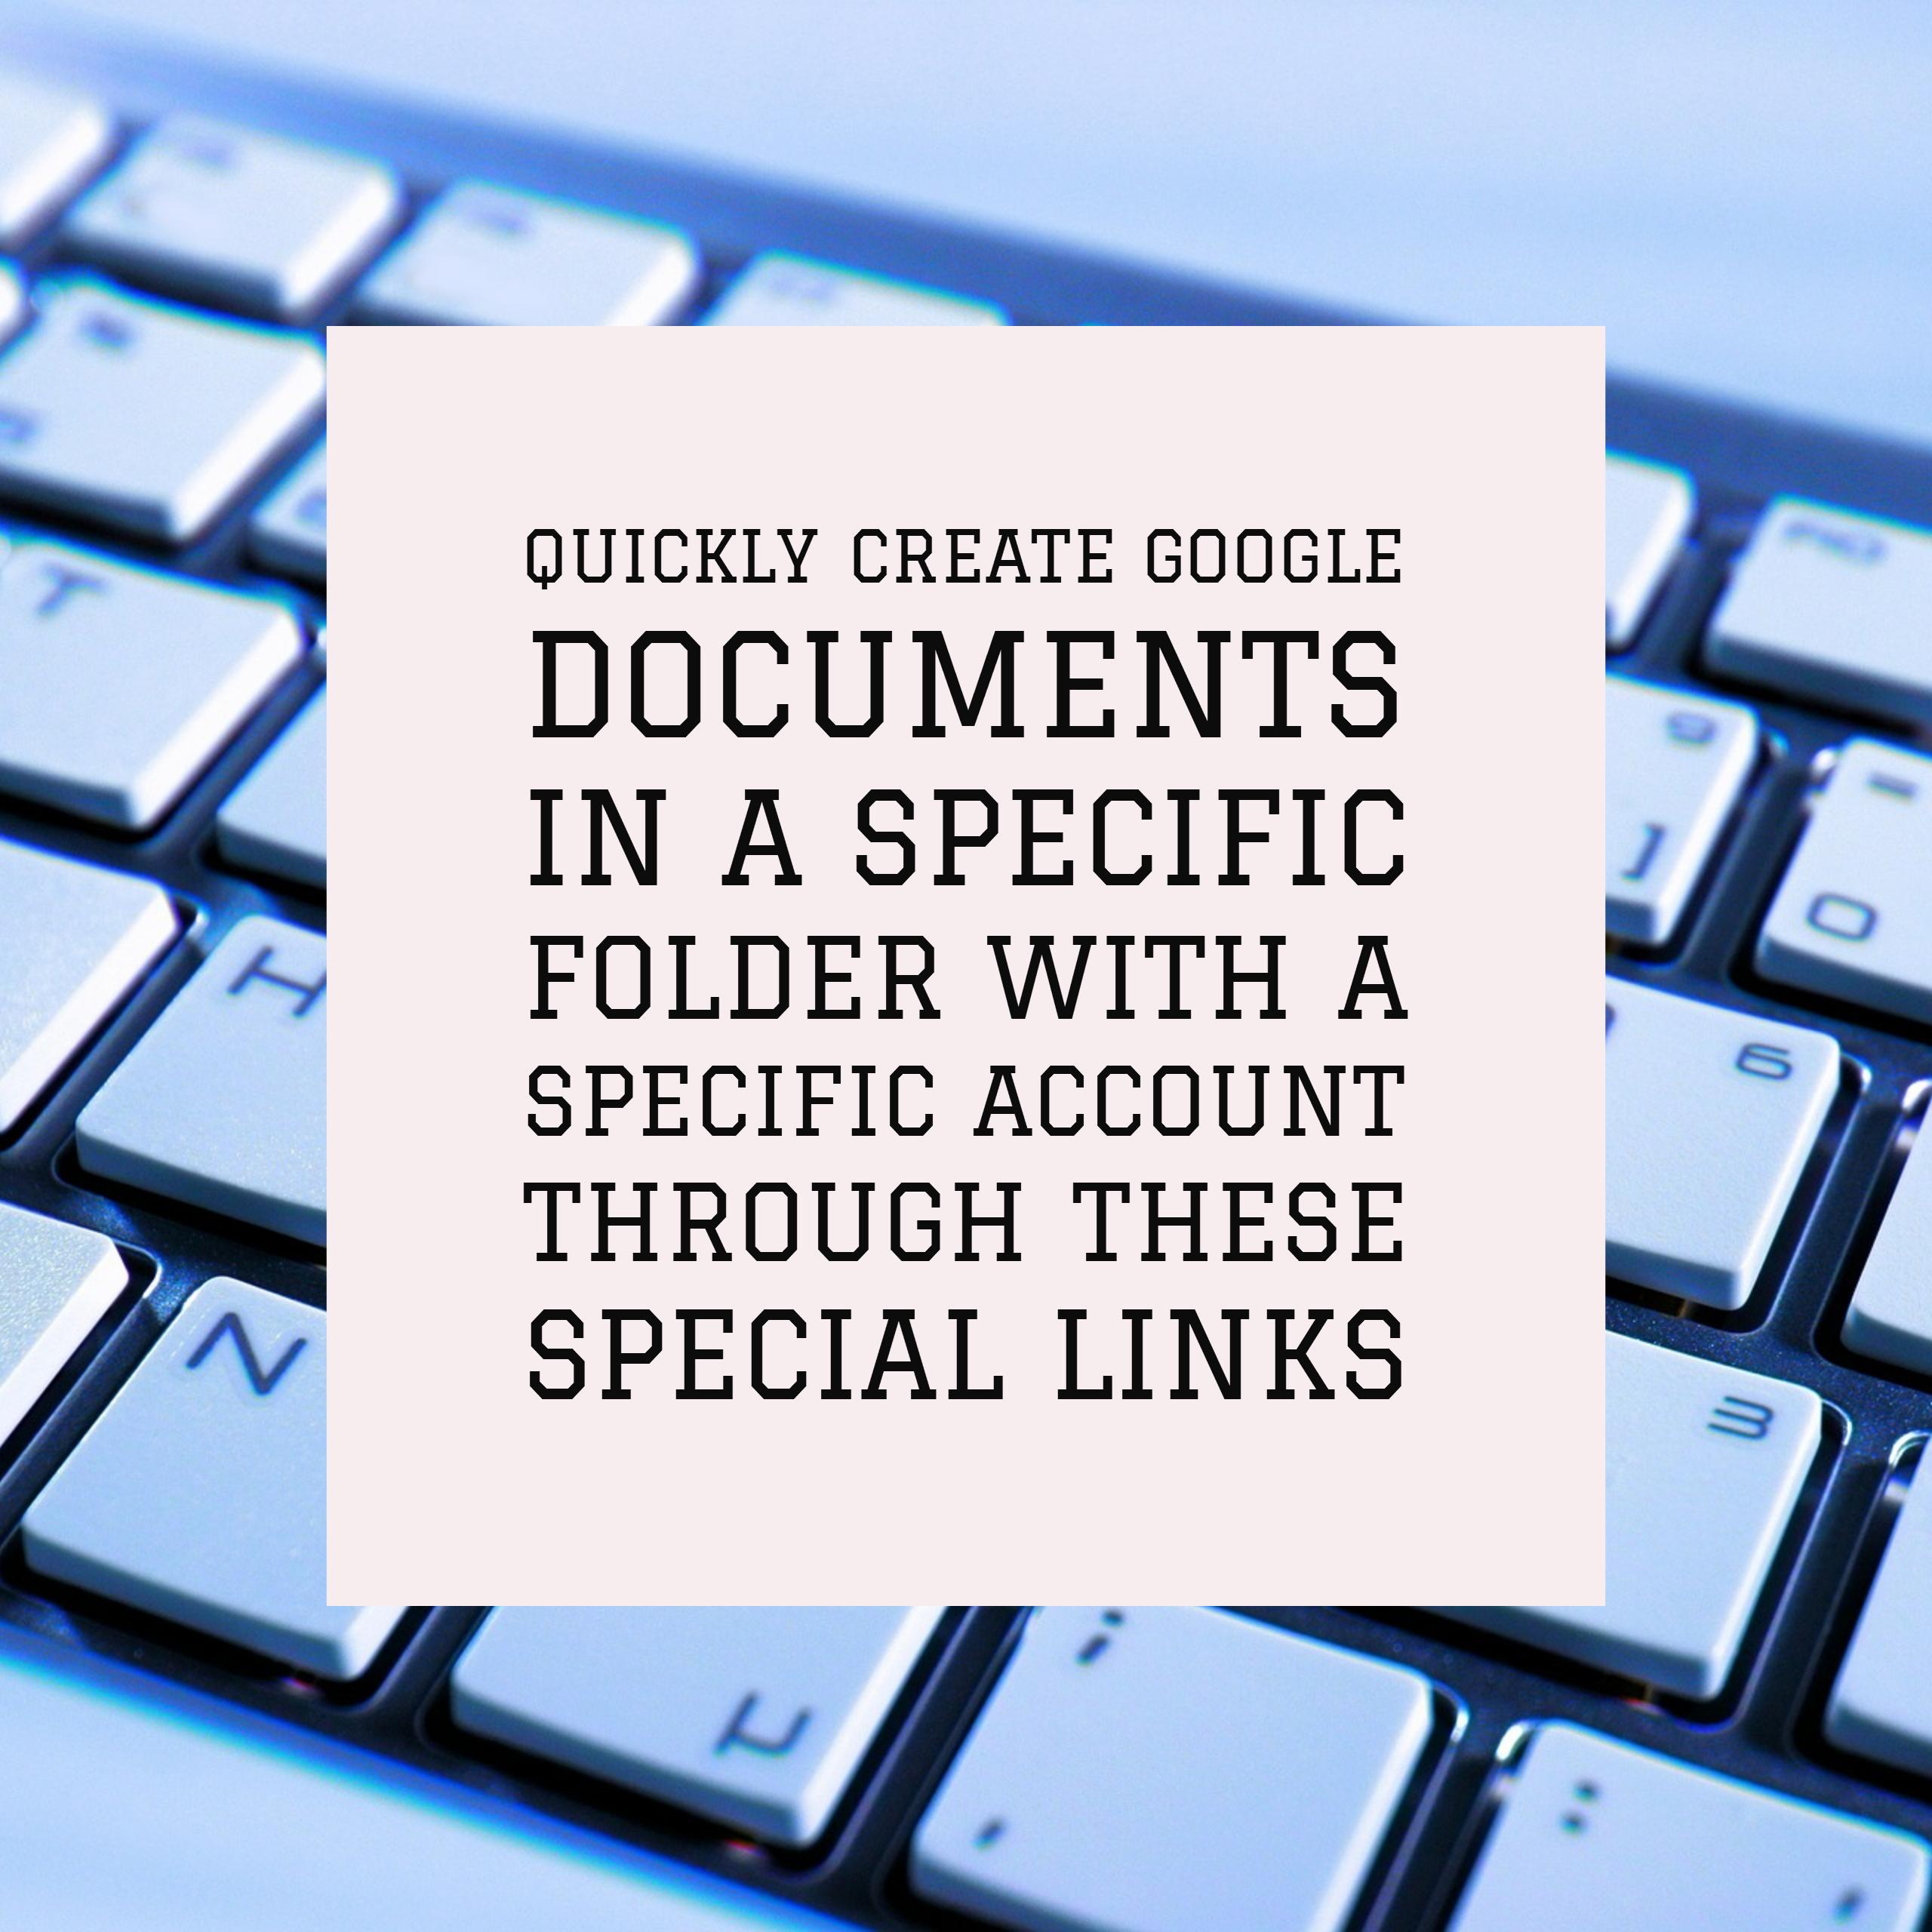 Quickly create Google documents in a specific folder with a specific account through these special links